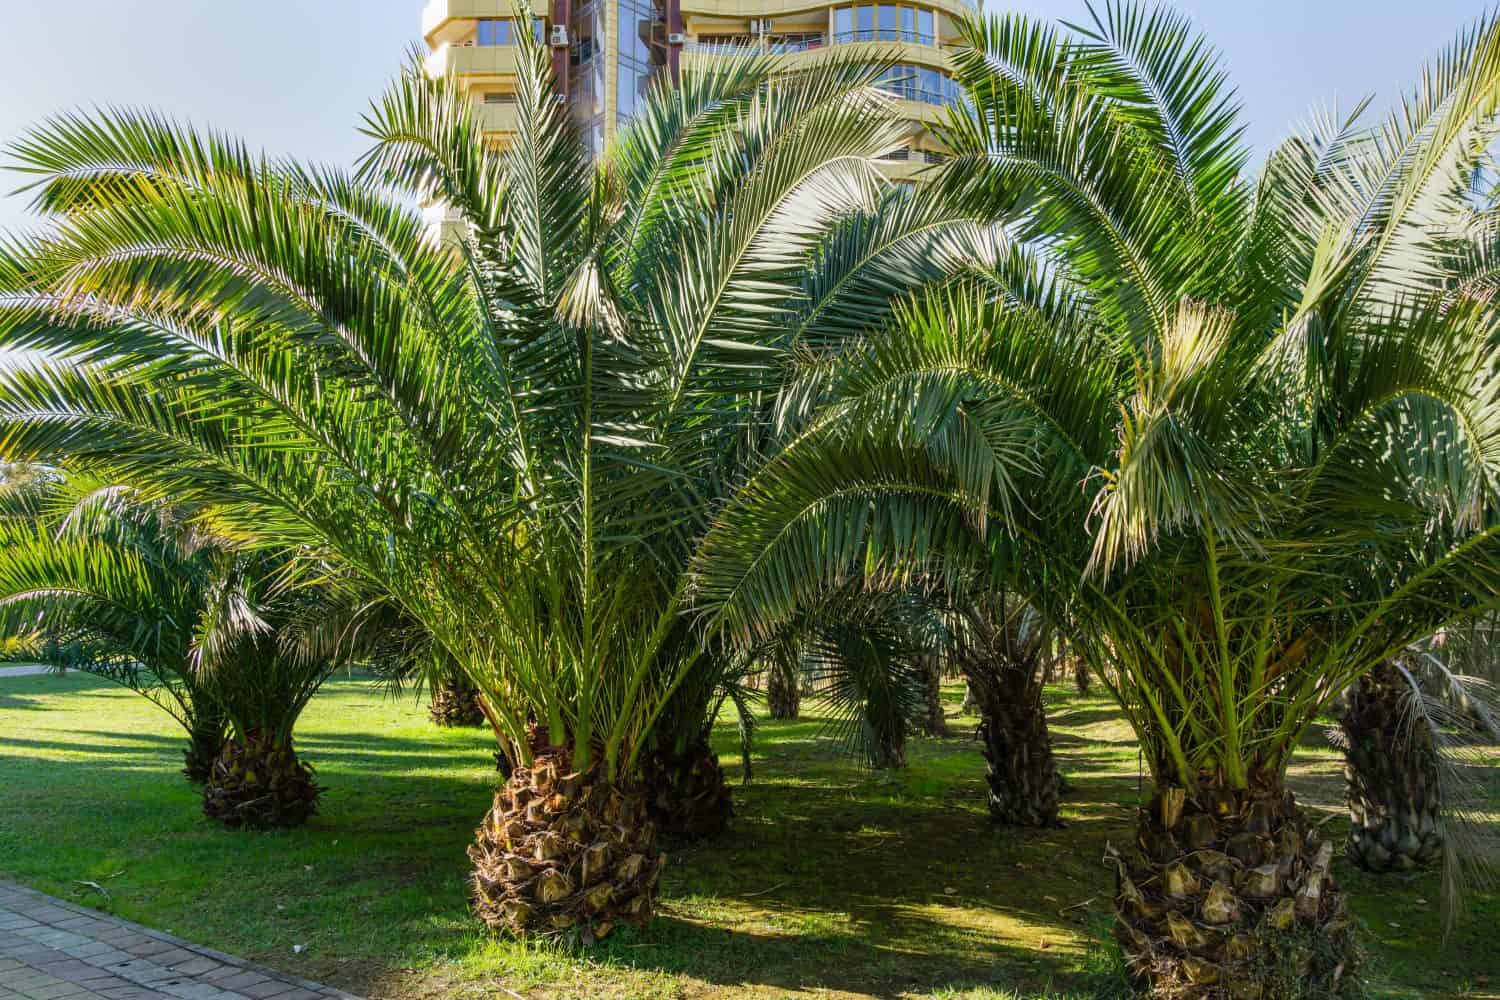 Luxury leaves of beautiful palm tree Canary Island Date Palm (Phoenix canariensis) in city park Sochi. Beautiful exotic landscape for any design. with big and young palms.